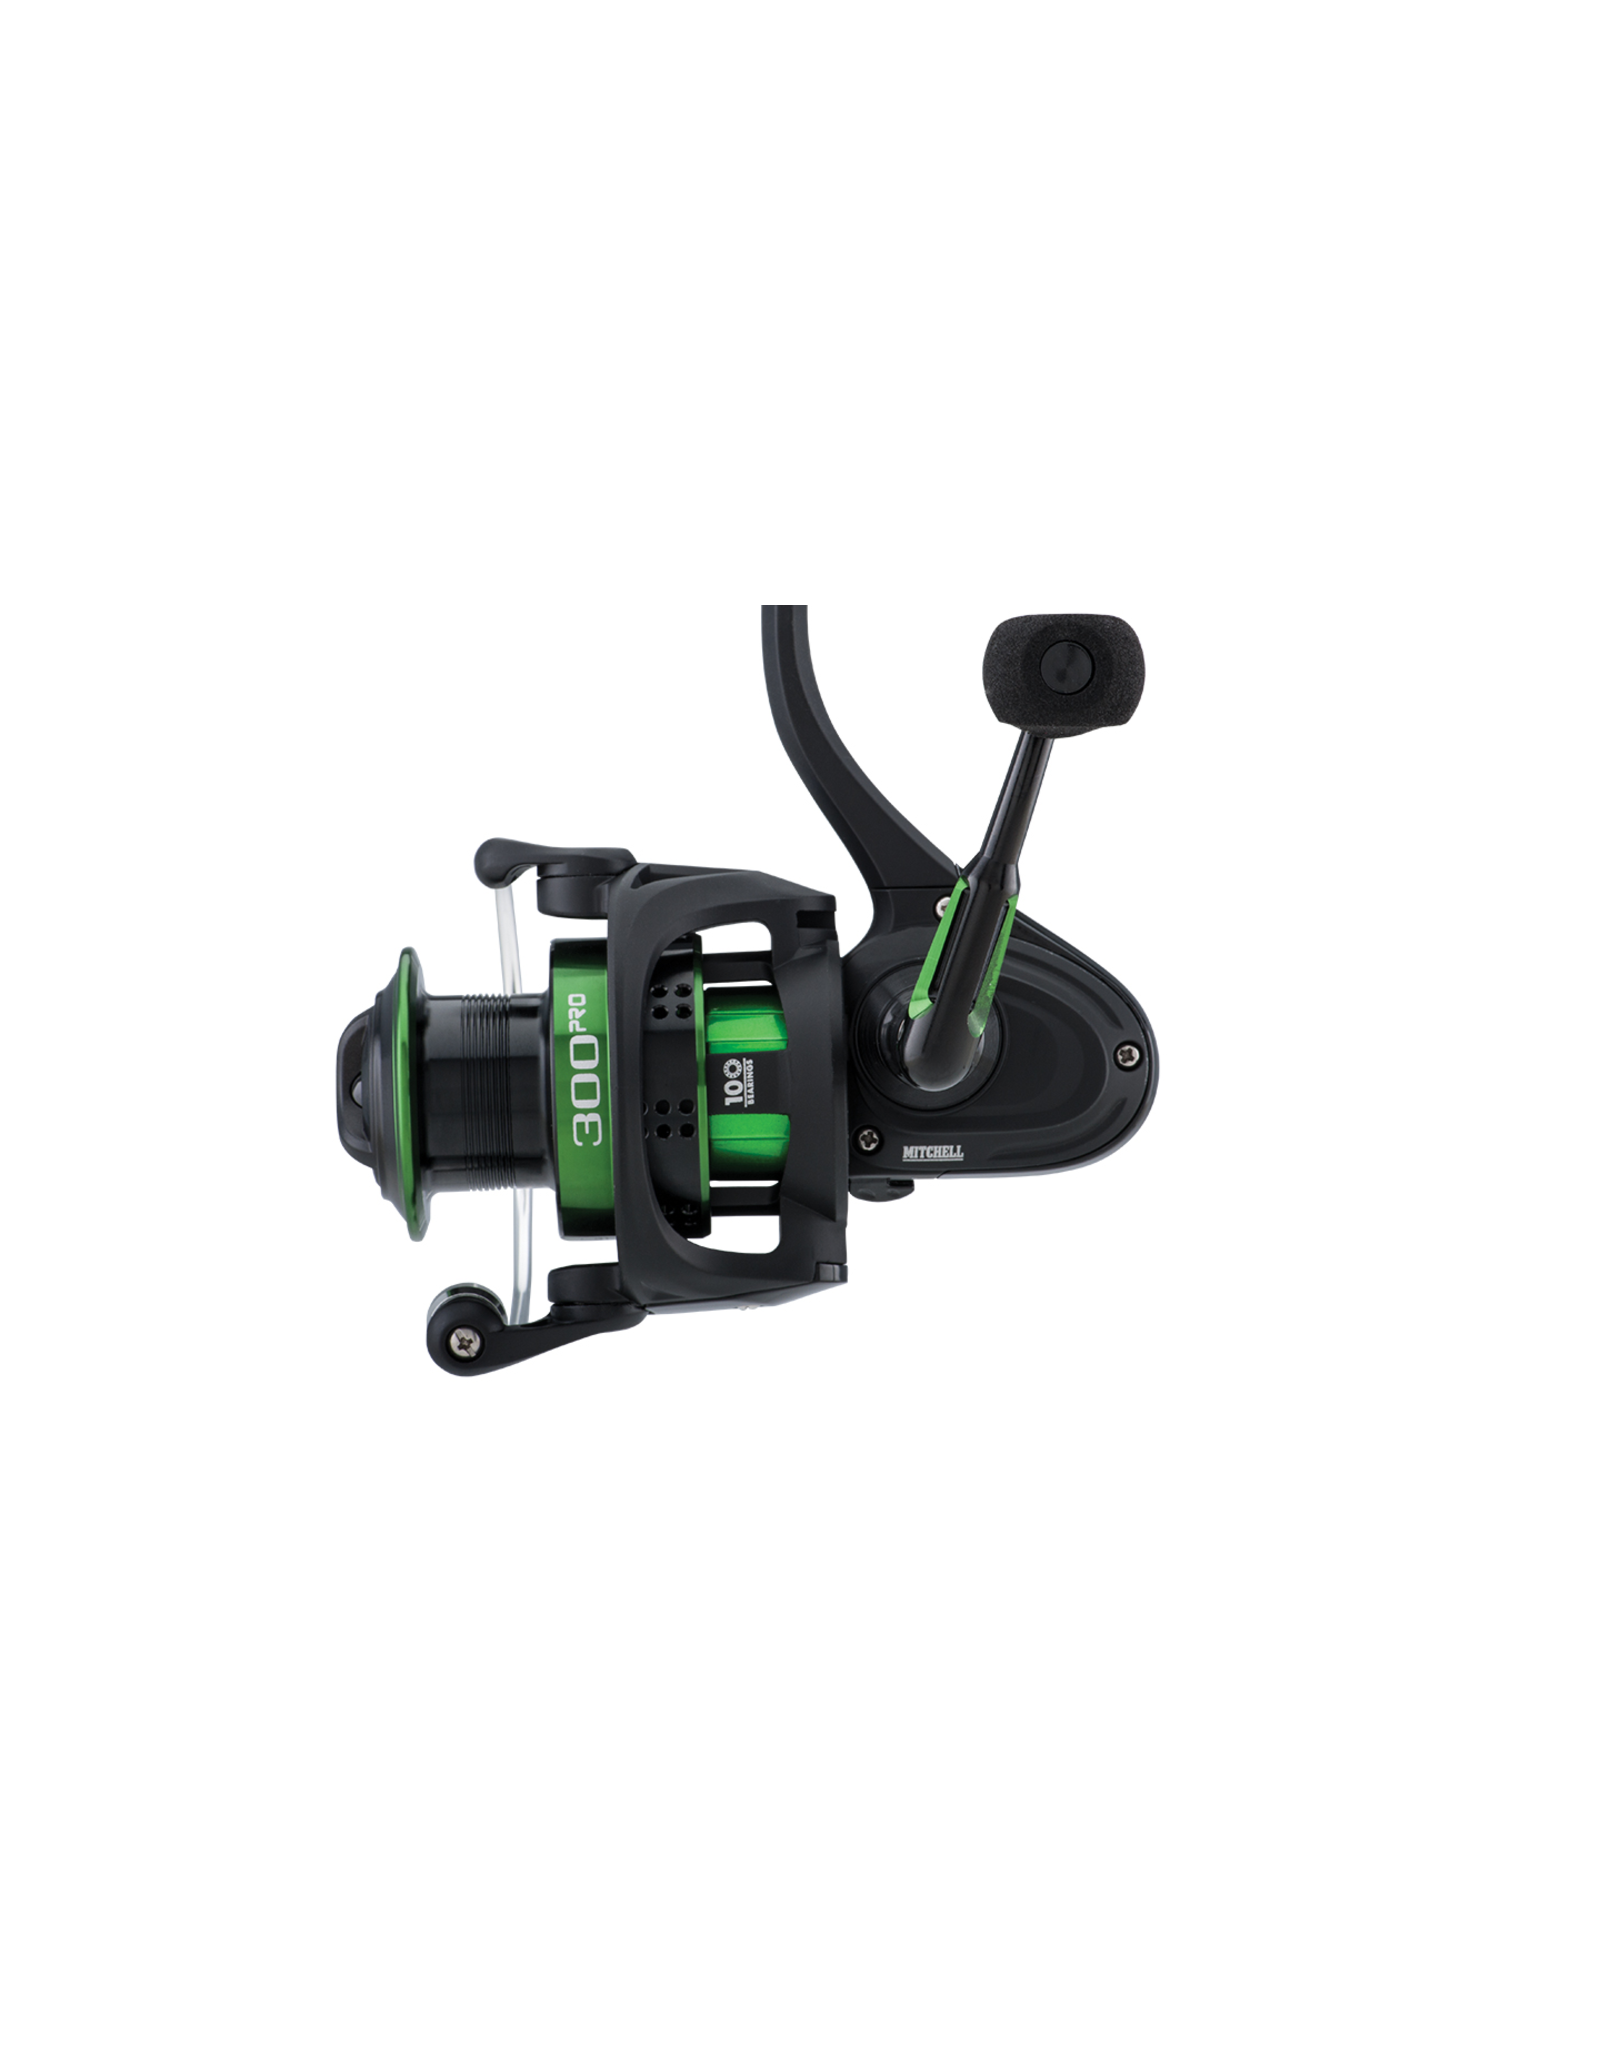 Fishing reel review - Mitchell 300 spinning reel review